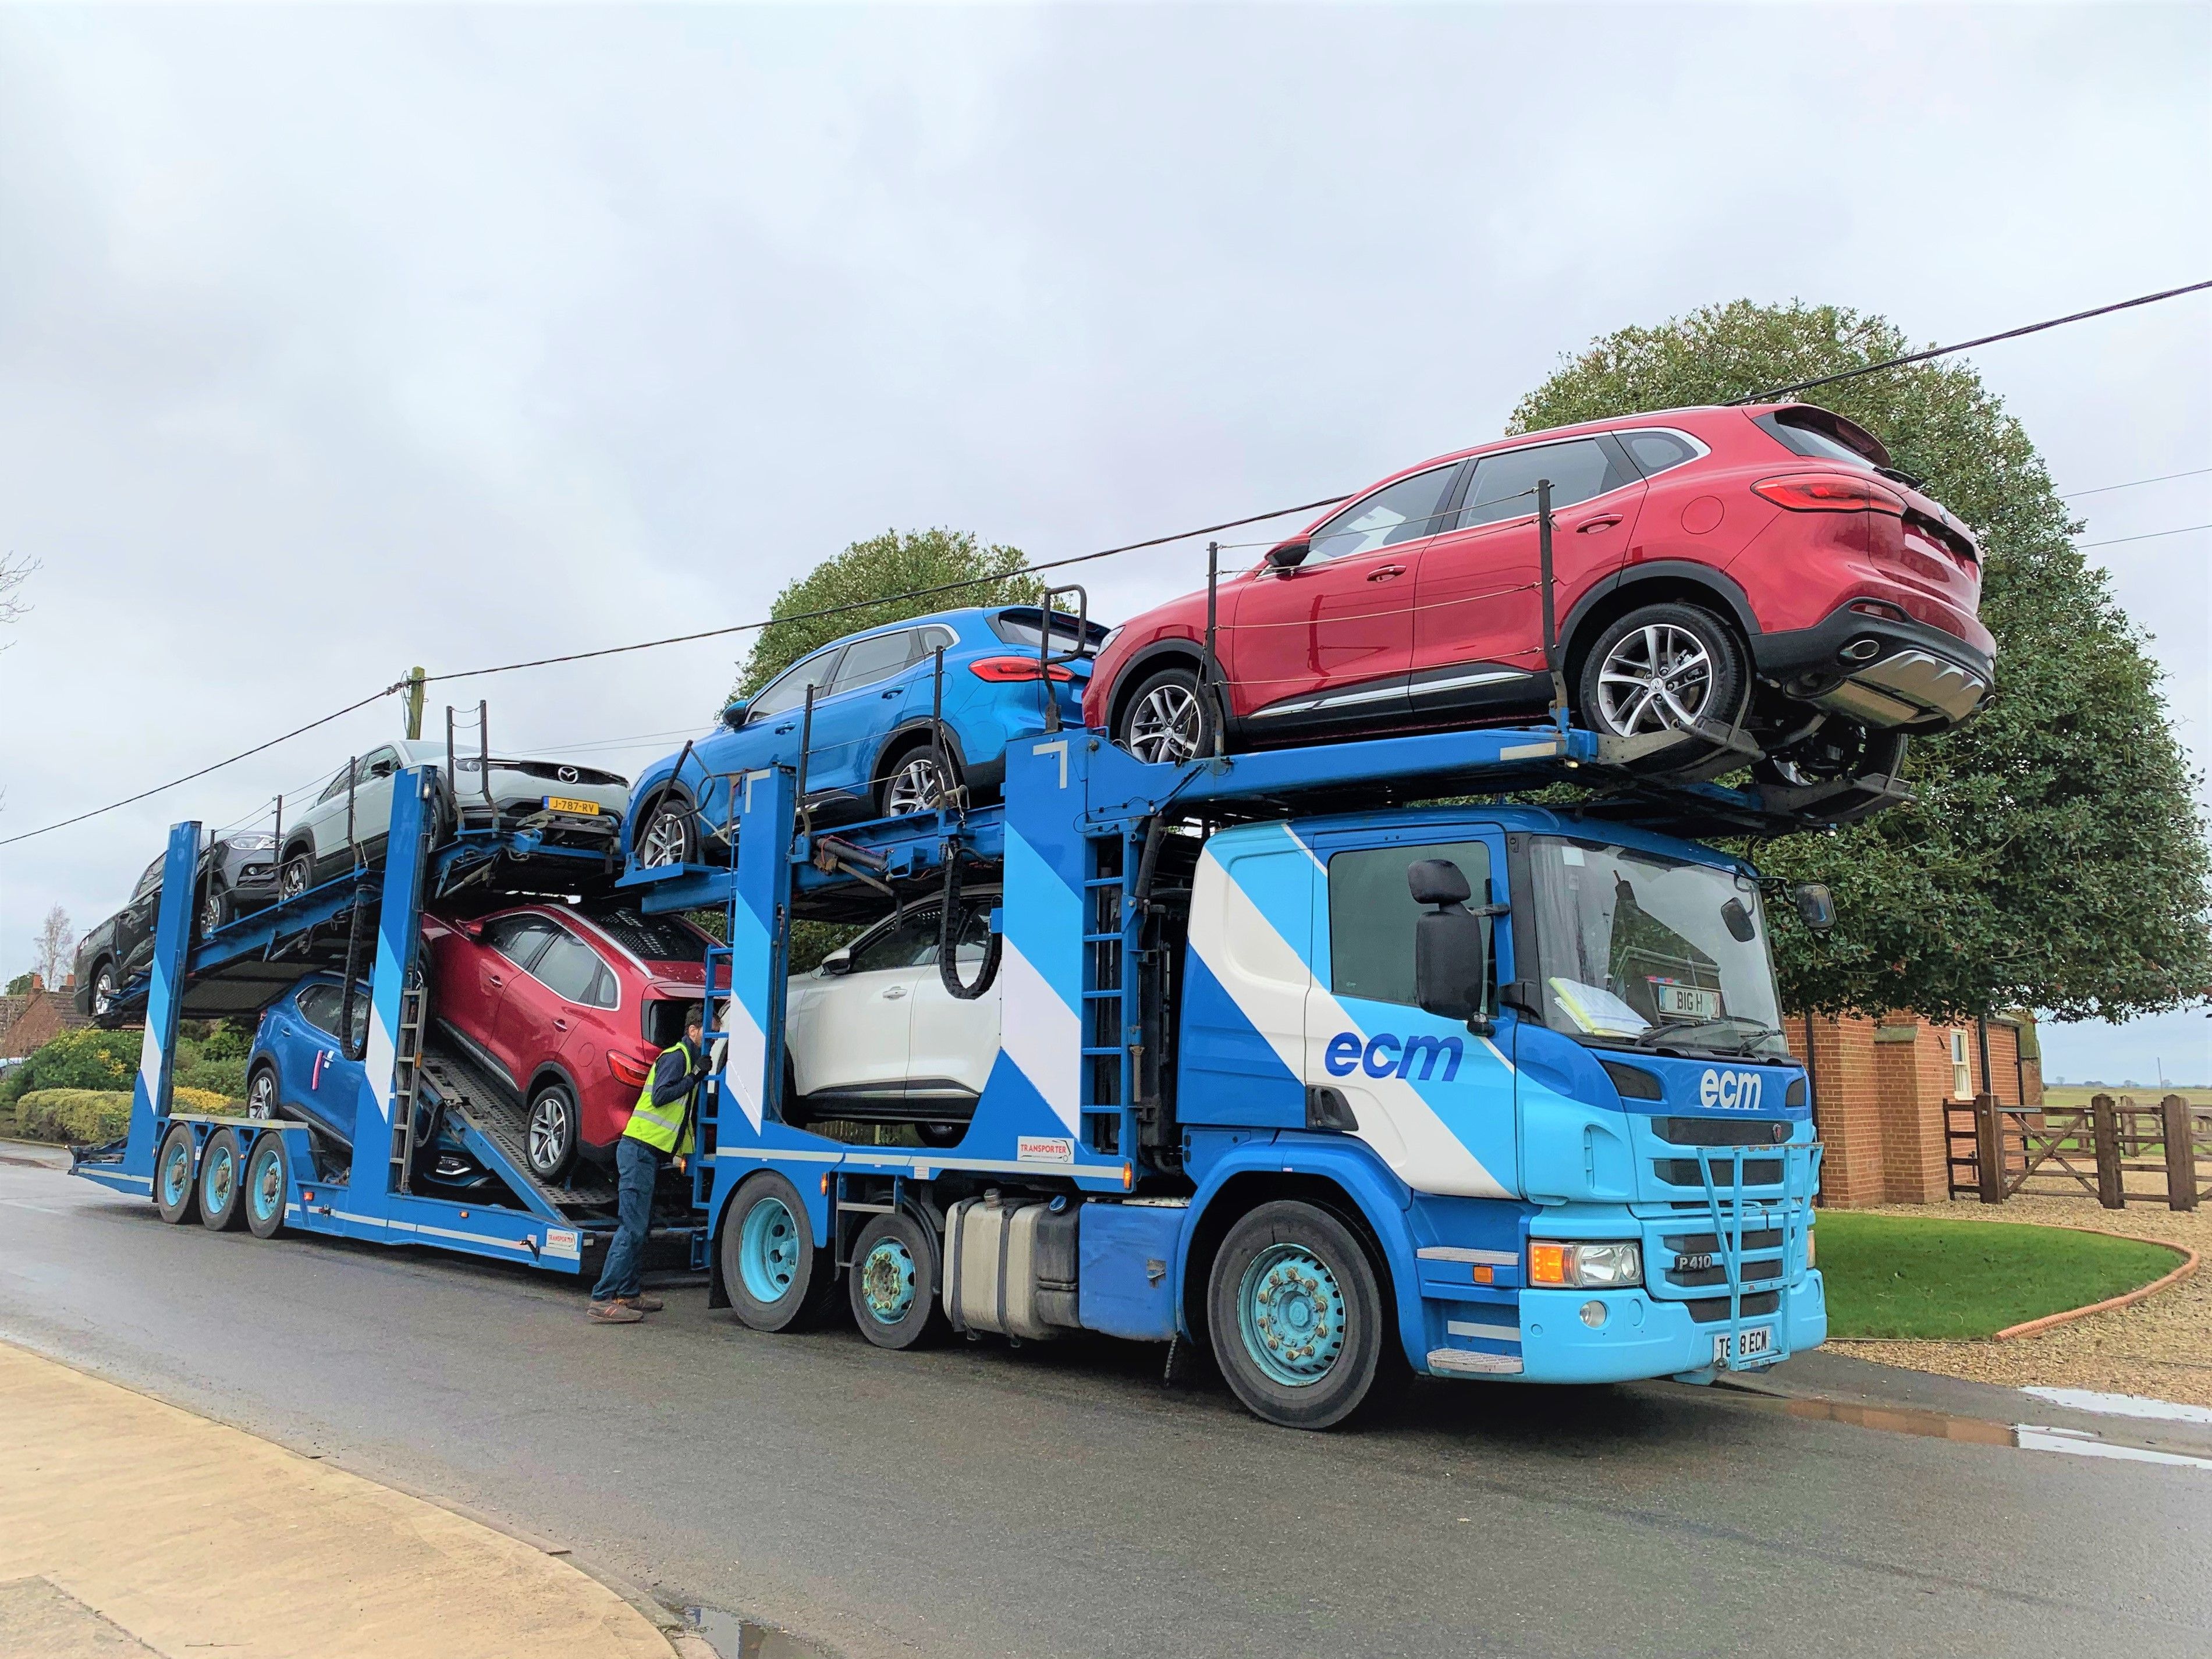 HERE'S YESTERDAY'S DELIVERY OF SOLD VEHICLES...